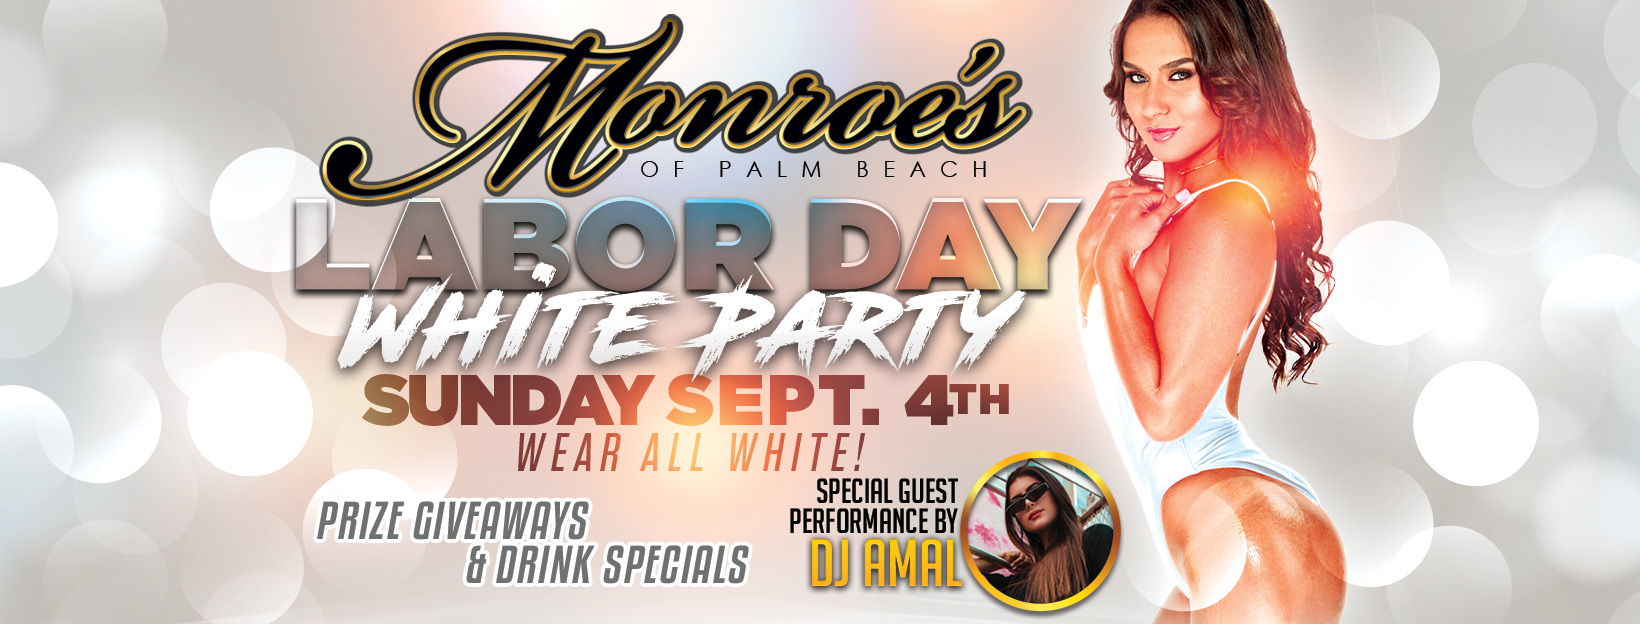 Monroes Labor Day White Party